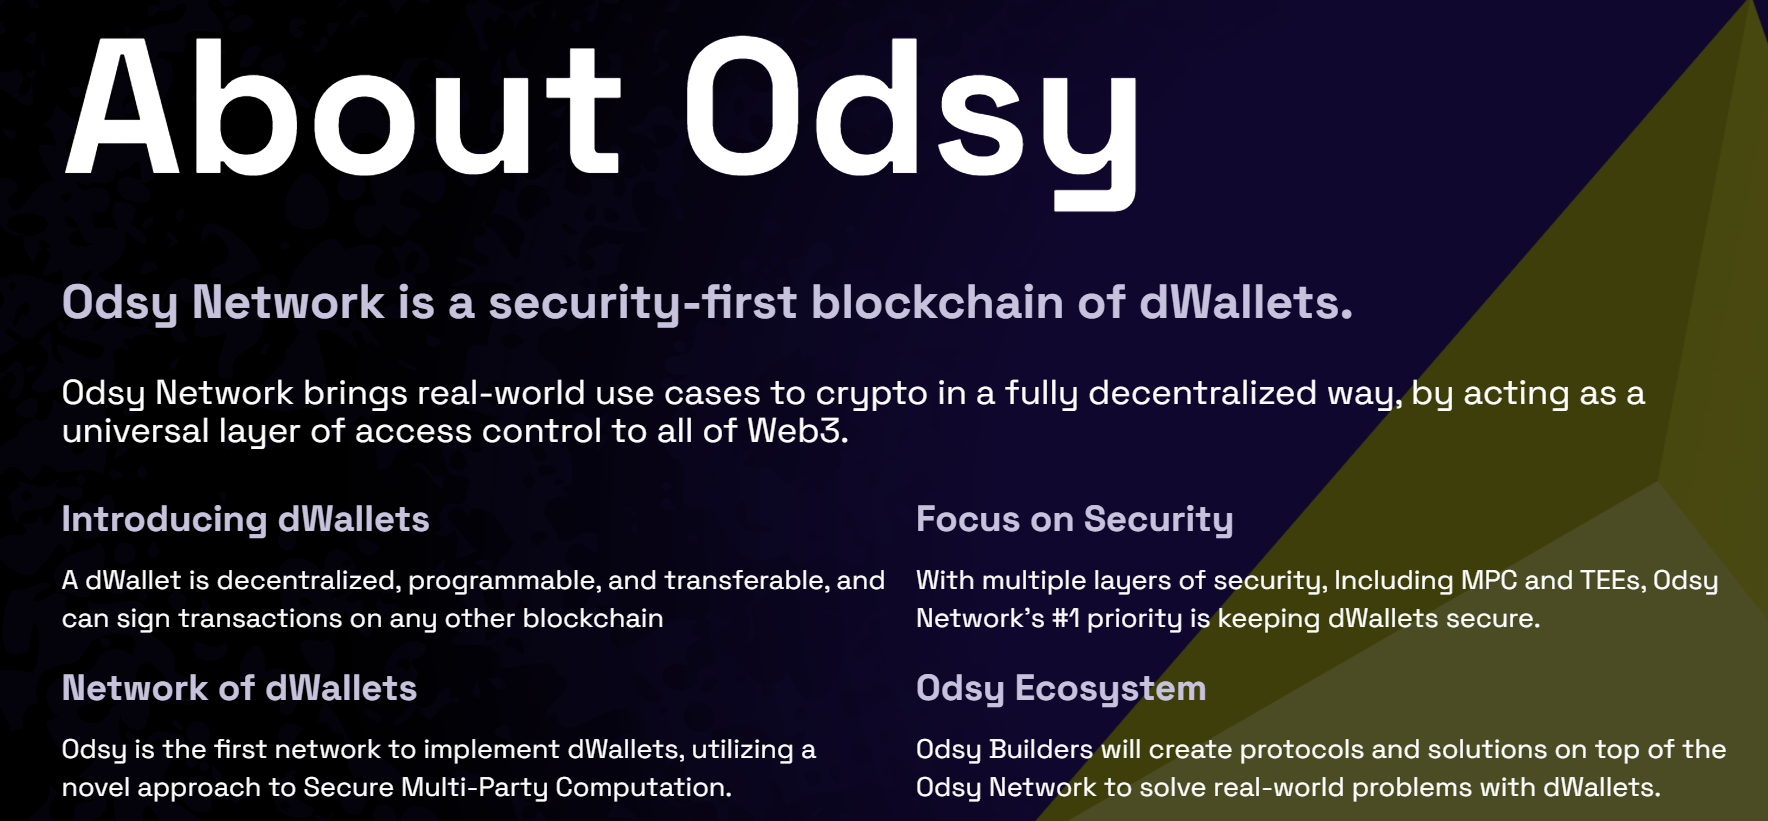 Odsy Network About